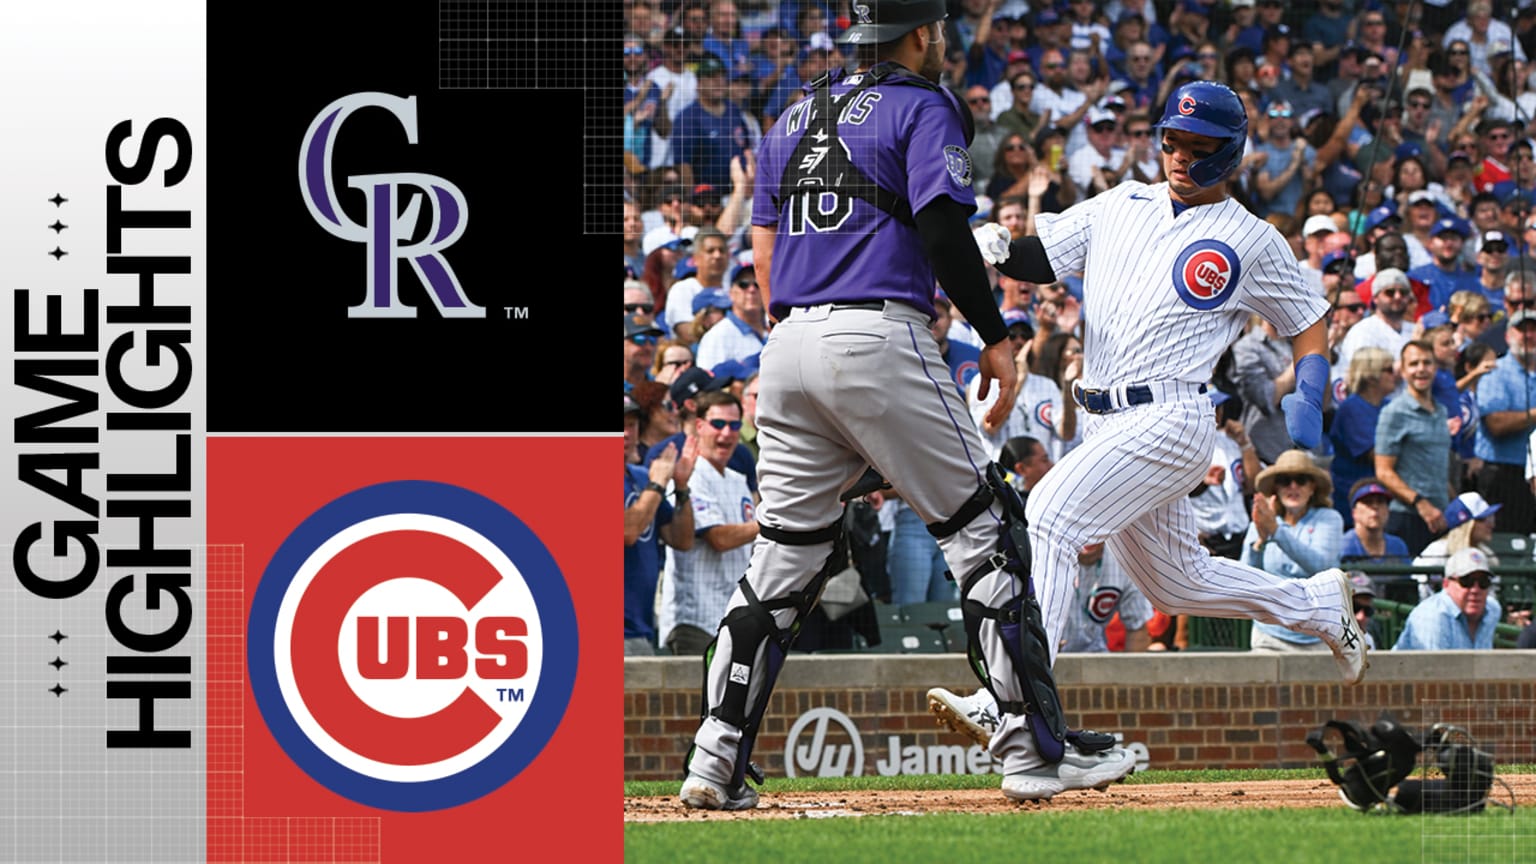 Yan Gomes leads Chicago Cubs to victory with three-hit performance against  Rockies - BVM Sports